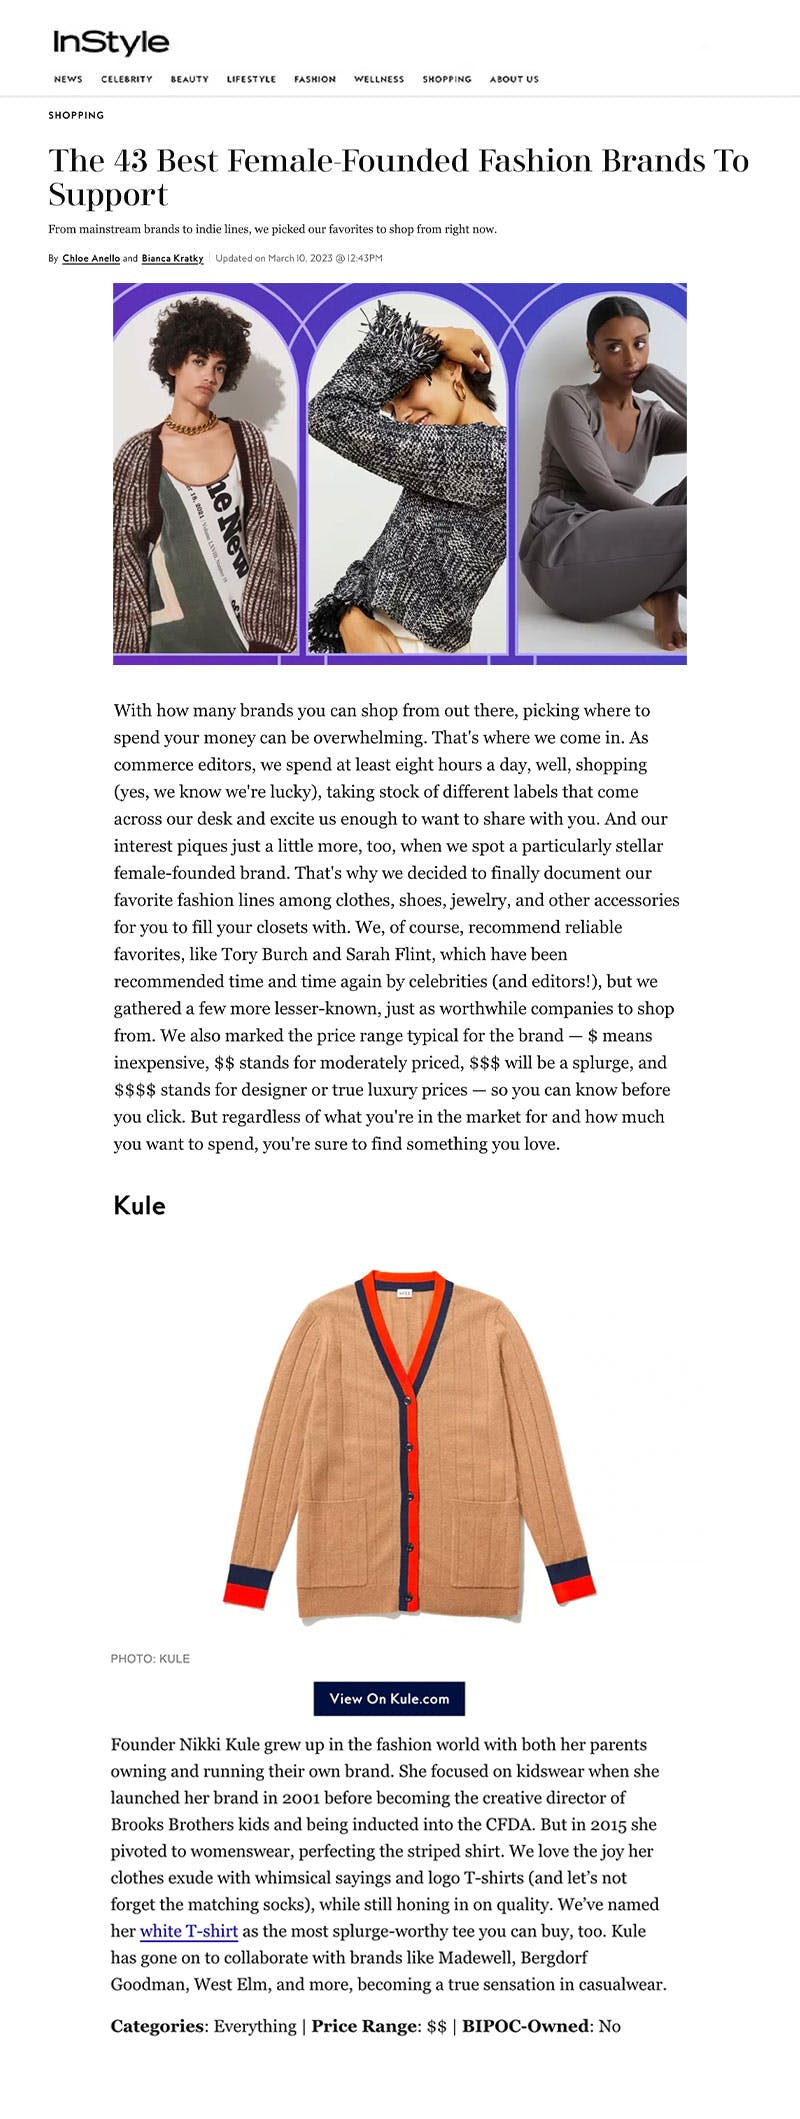 InStyle featuring KULE in Women founded brands